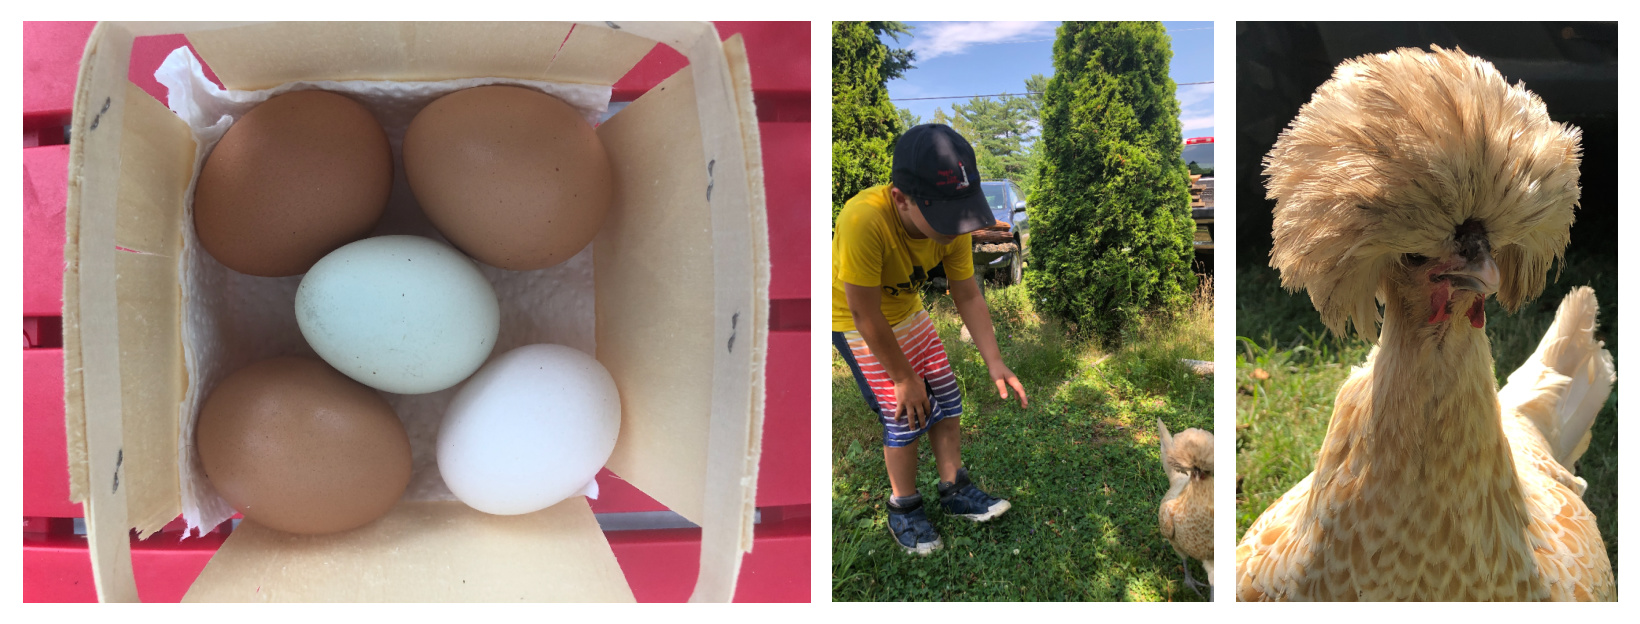 Fresh eggs and socializing with chickens